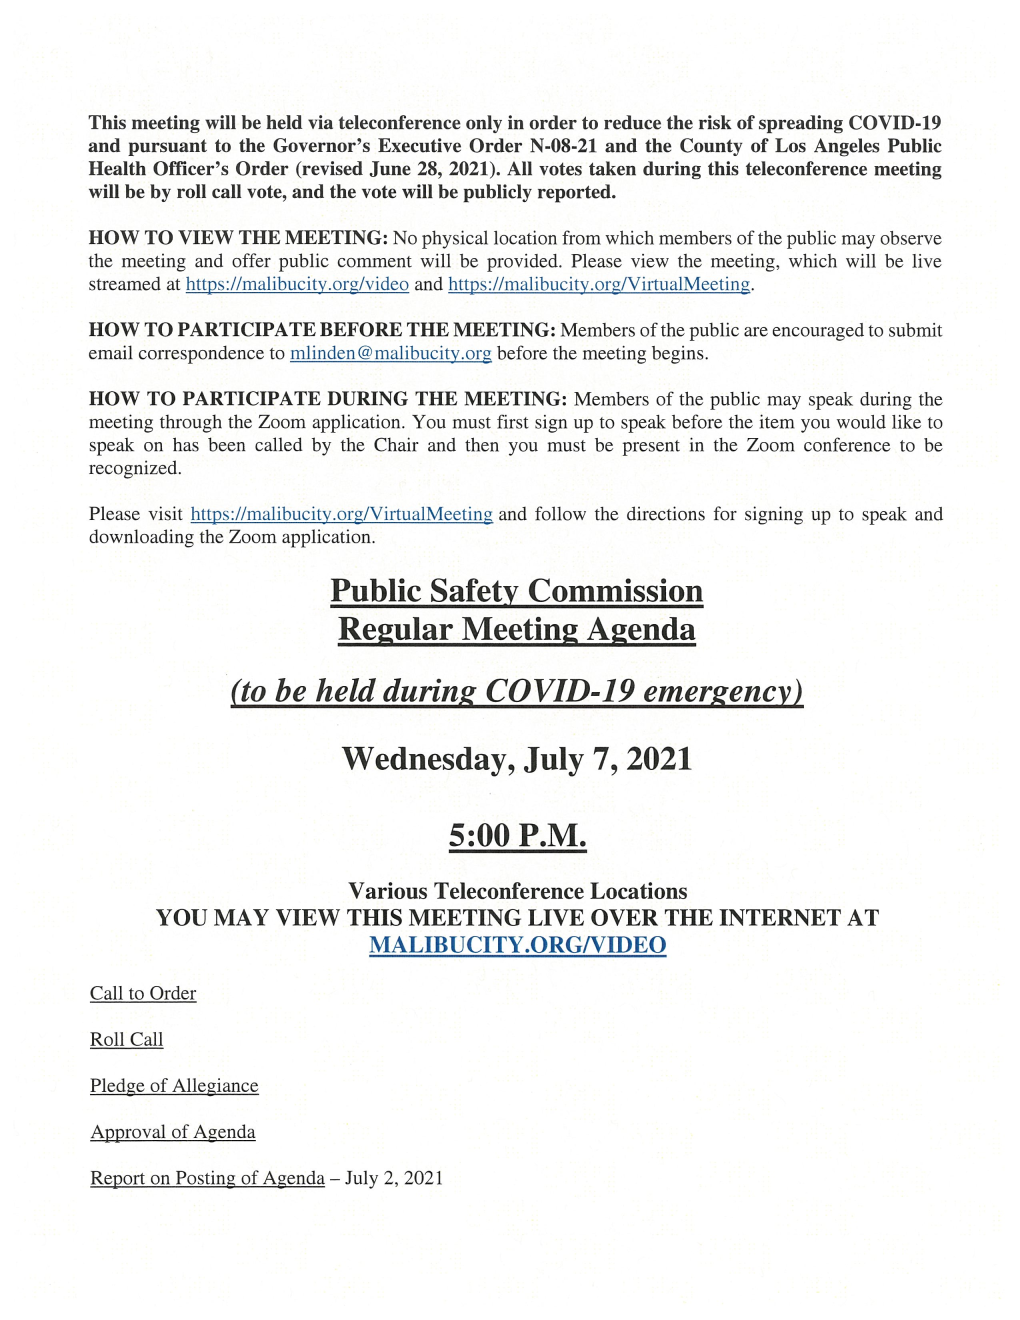 Public Safety Commission Regular Meeting Agenda (To Be Held During COVID-19 Emergency) Wednesday, July 7, 2021